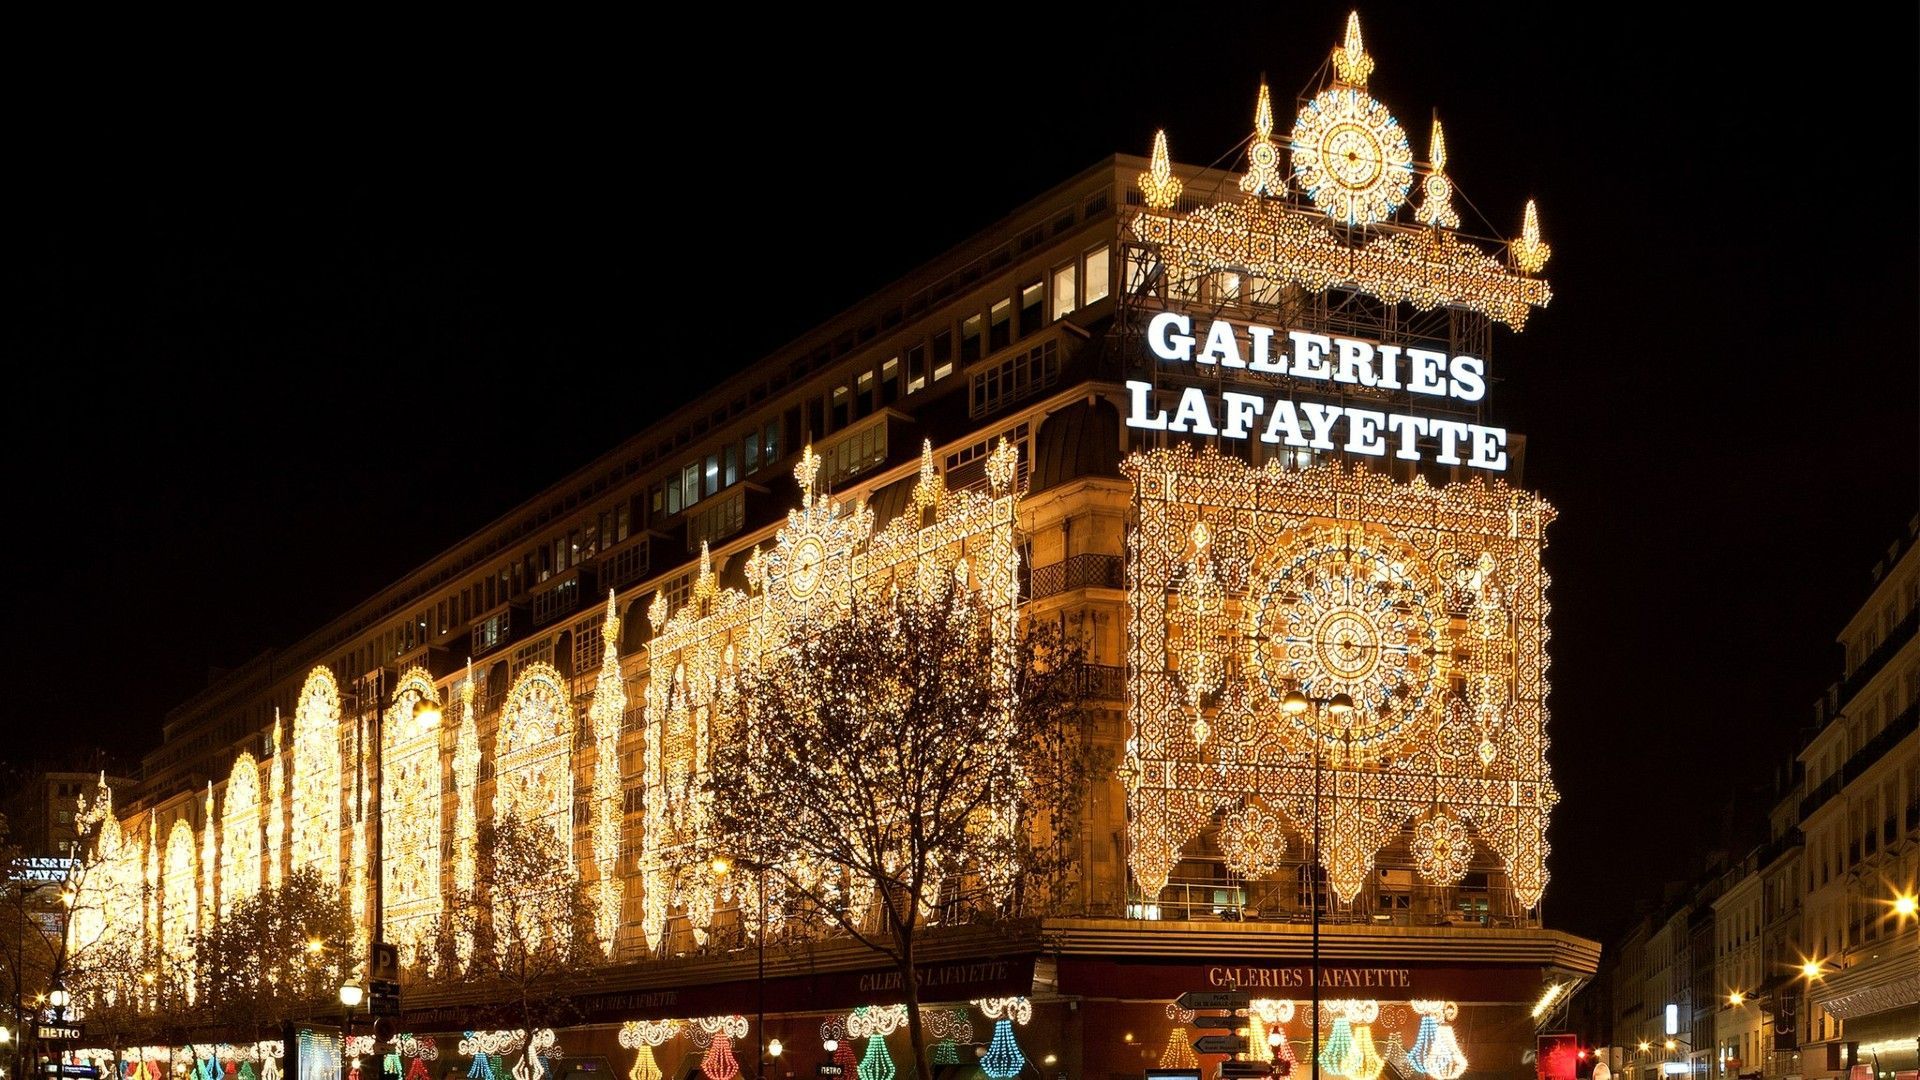 French Department Store Galeries Lafayette to Open in India – WWD